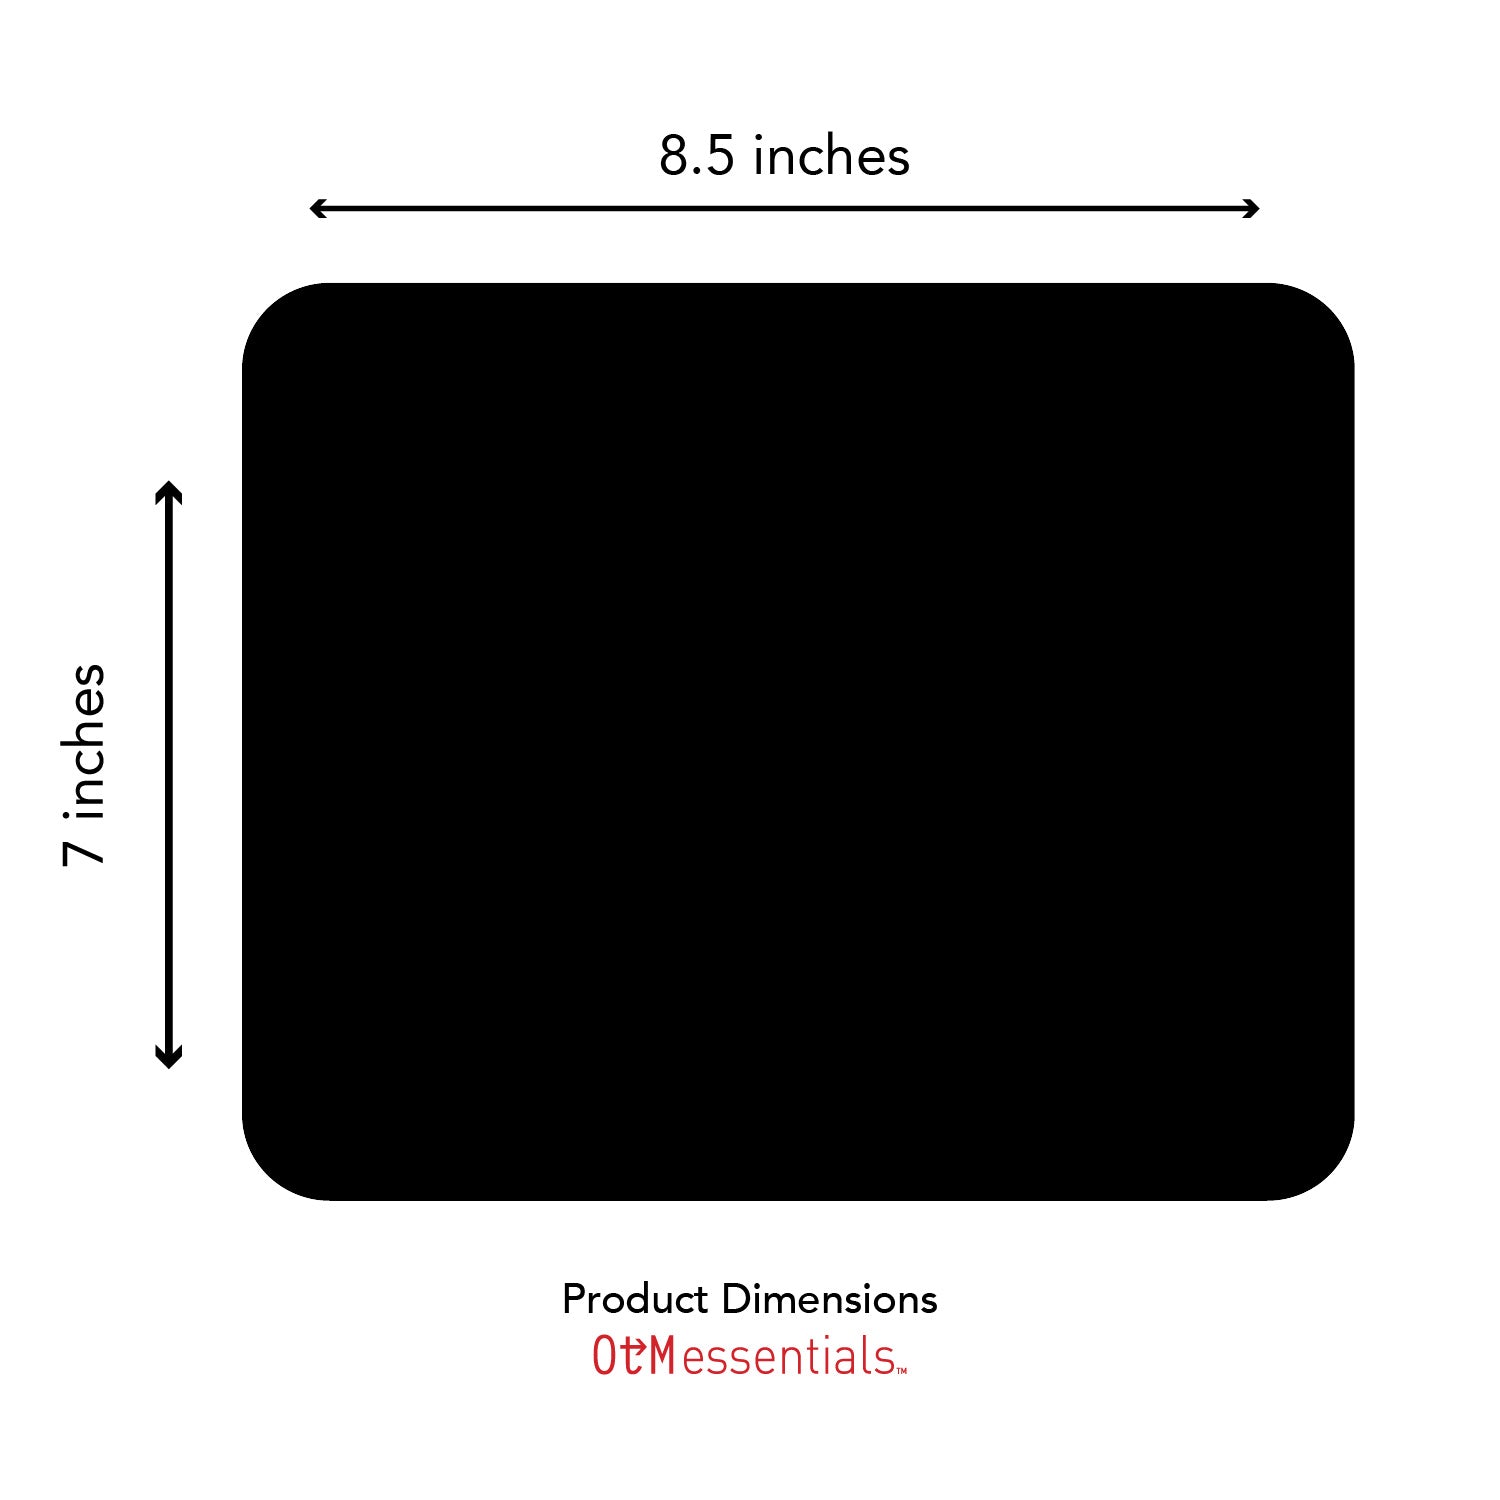 OC-GT2-MH03A, Product Dimensions